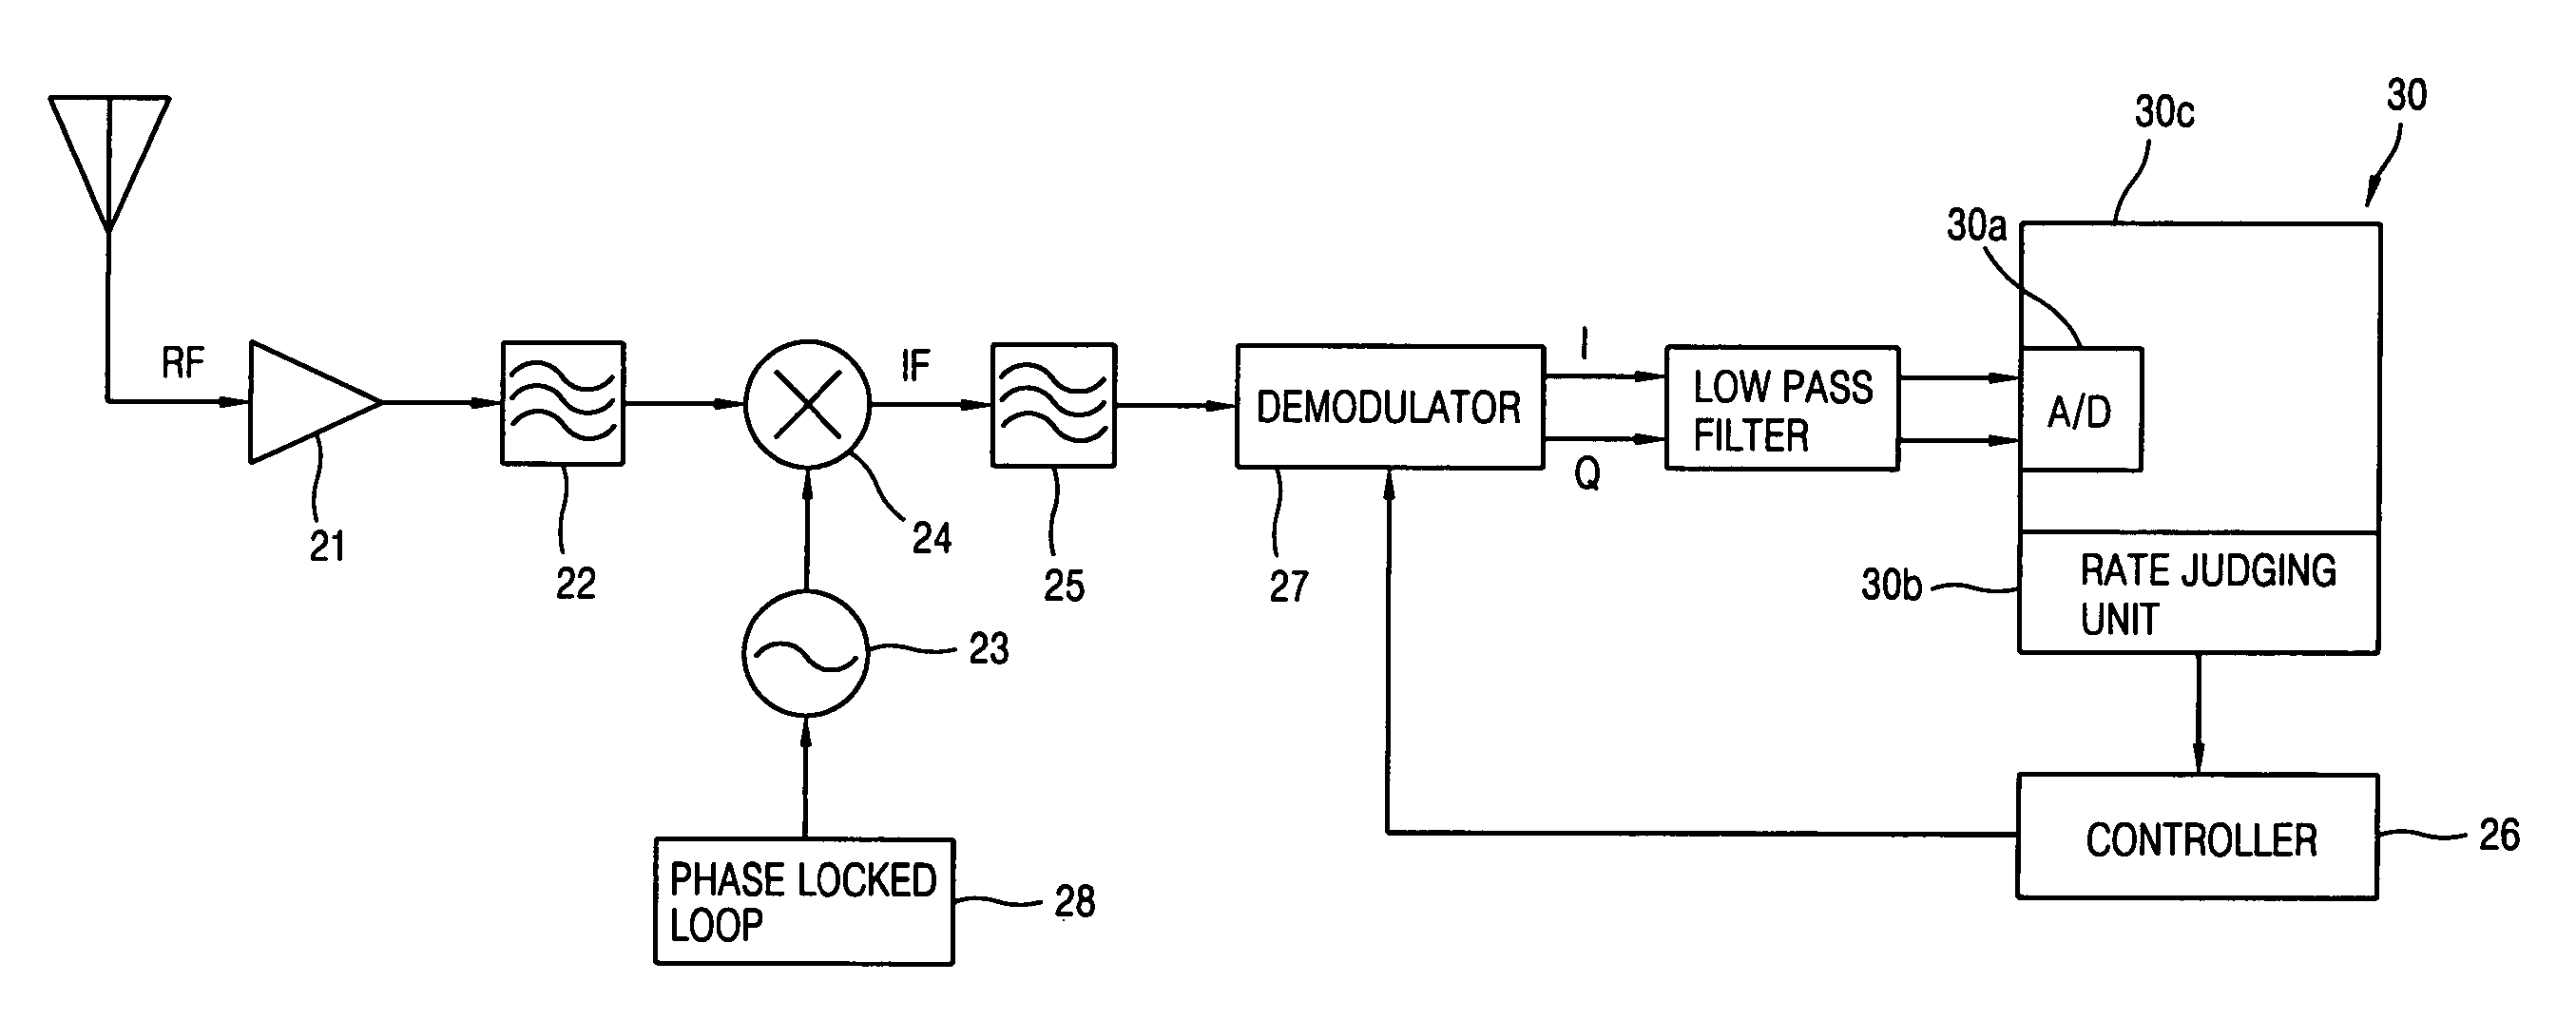 Receiving apparatus and method of high speed digital data communication system